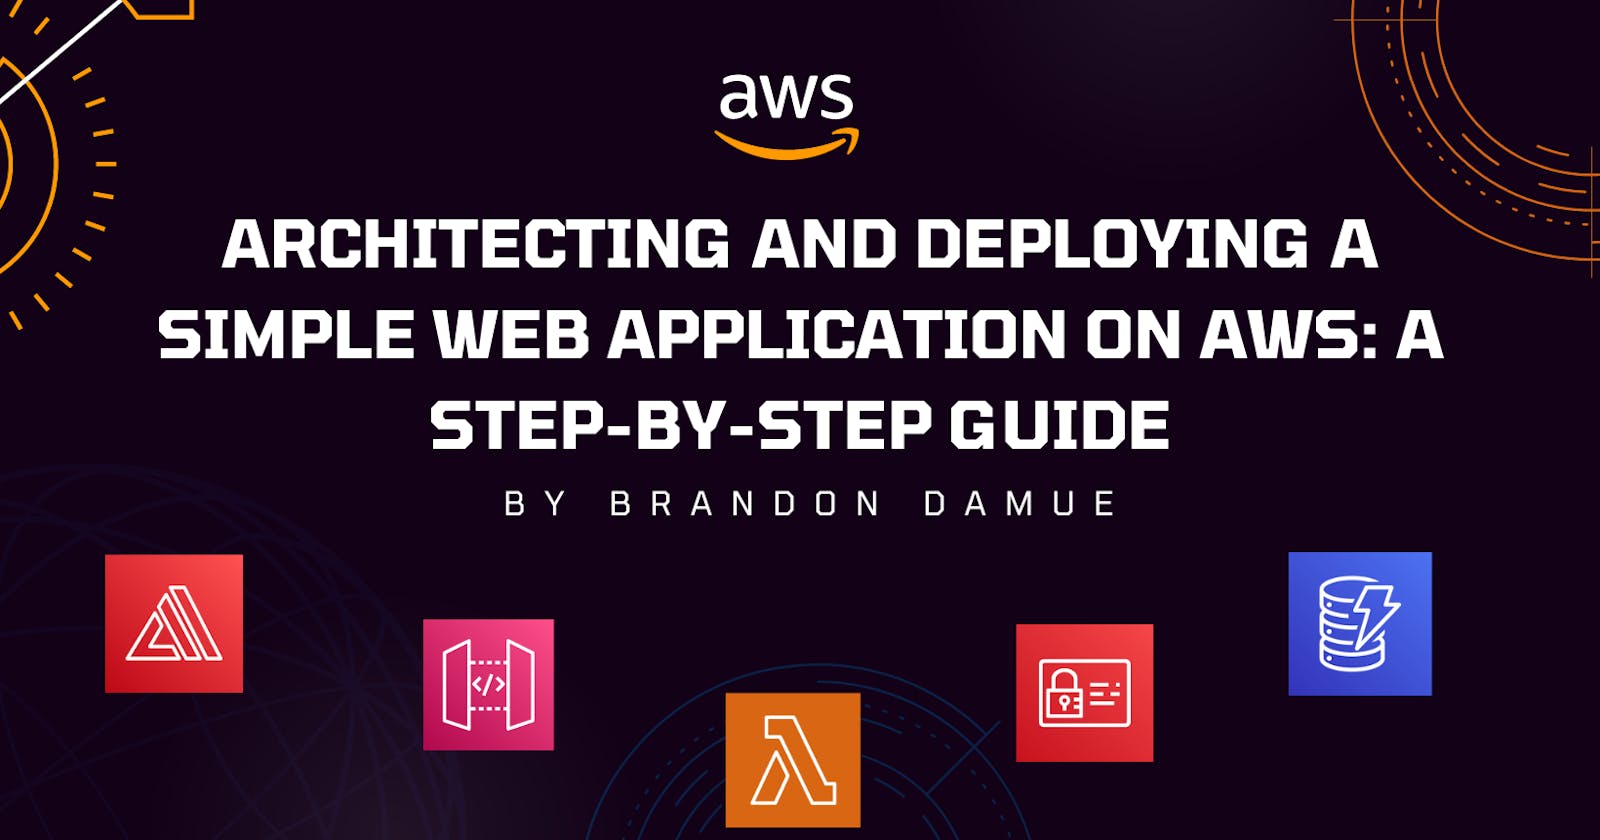 Architecting and Deploying a Simple Web Application on AWS: A Step-by-Step Guide